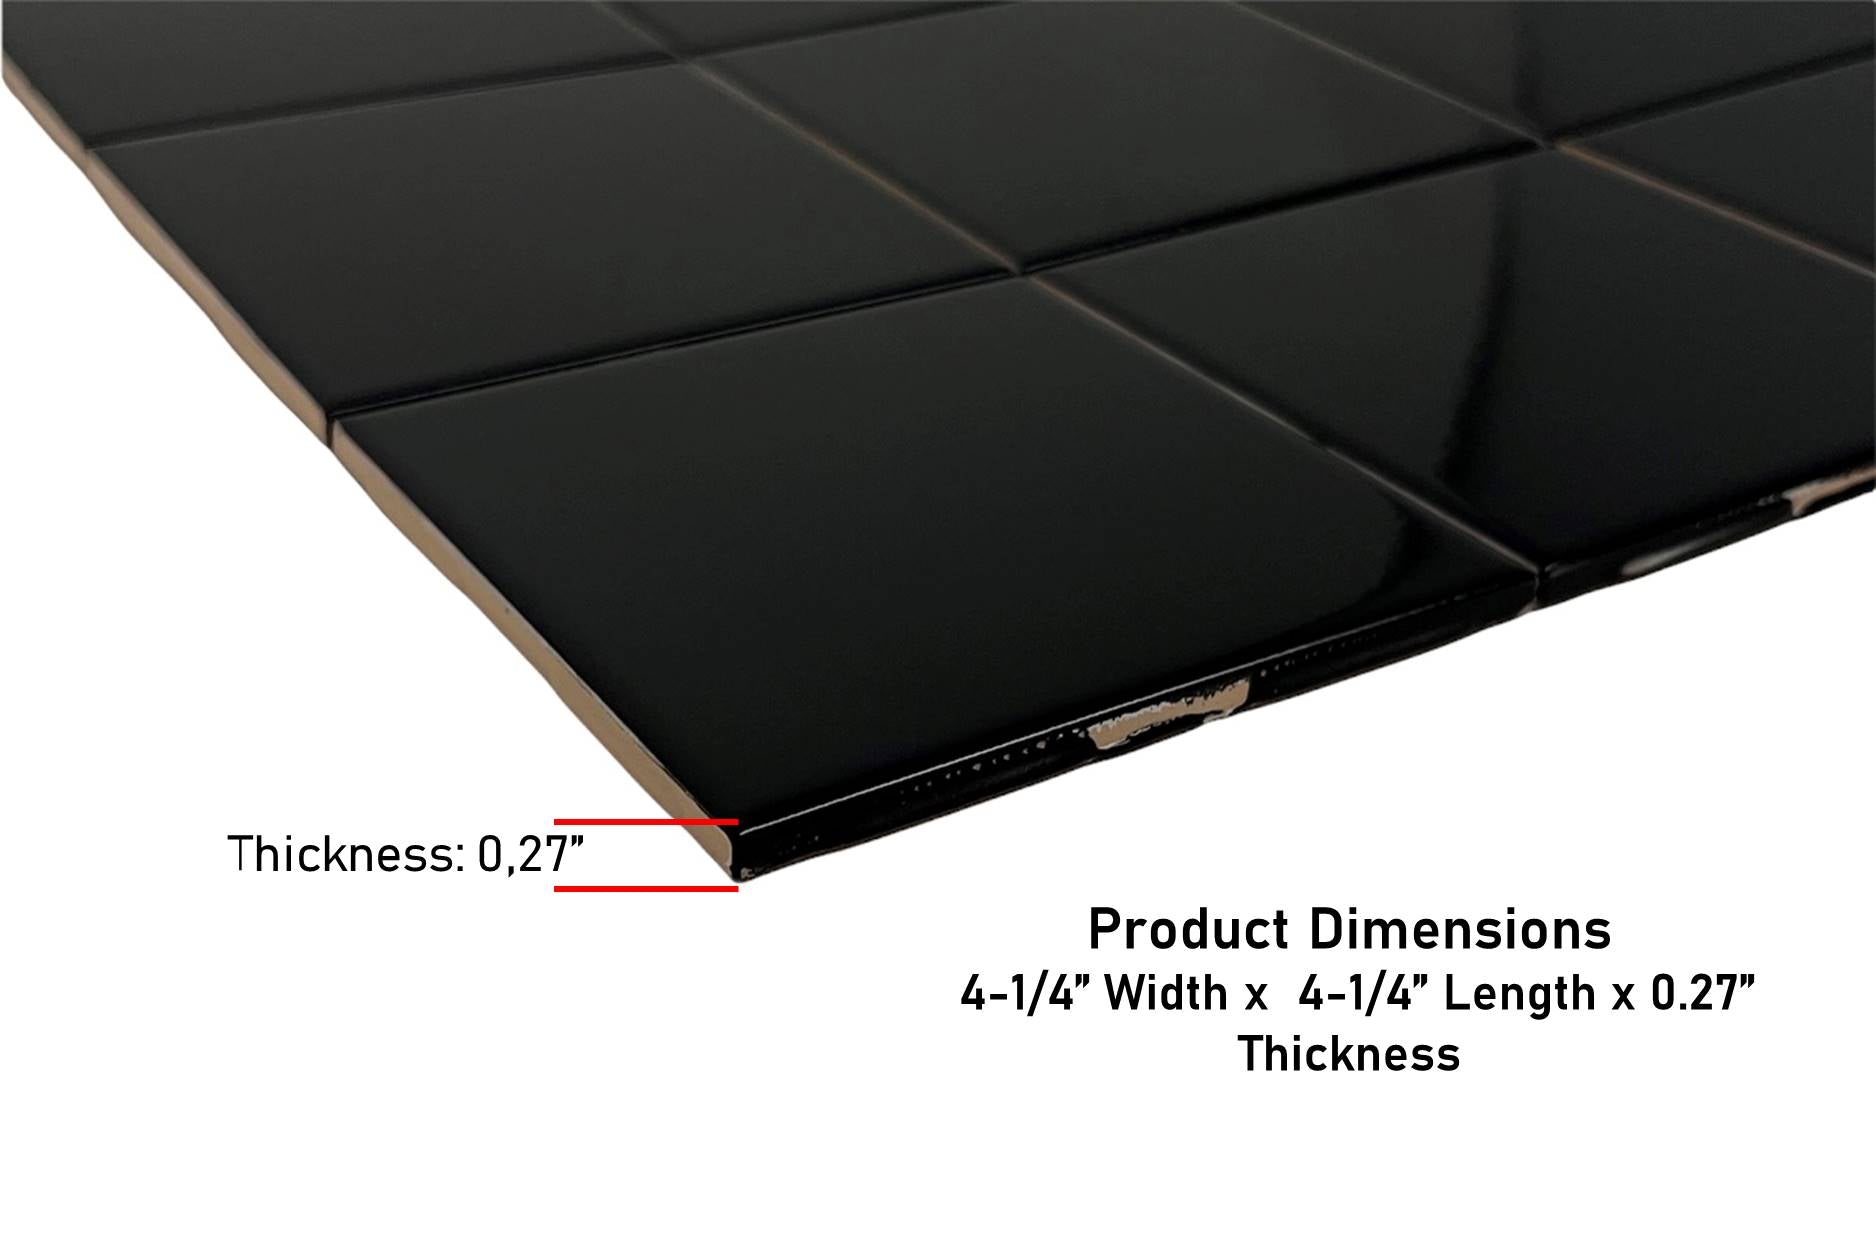 4 in Black Ceramic Tile 4.25 inch Gloss (Shinny) 4 1/4" Box of 10 Piece for Bathroom Wall and Kitchen Backsplash